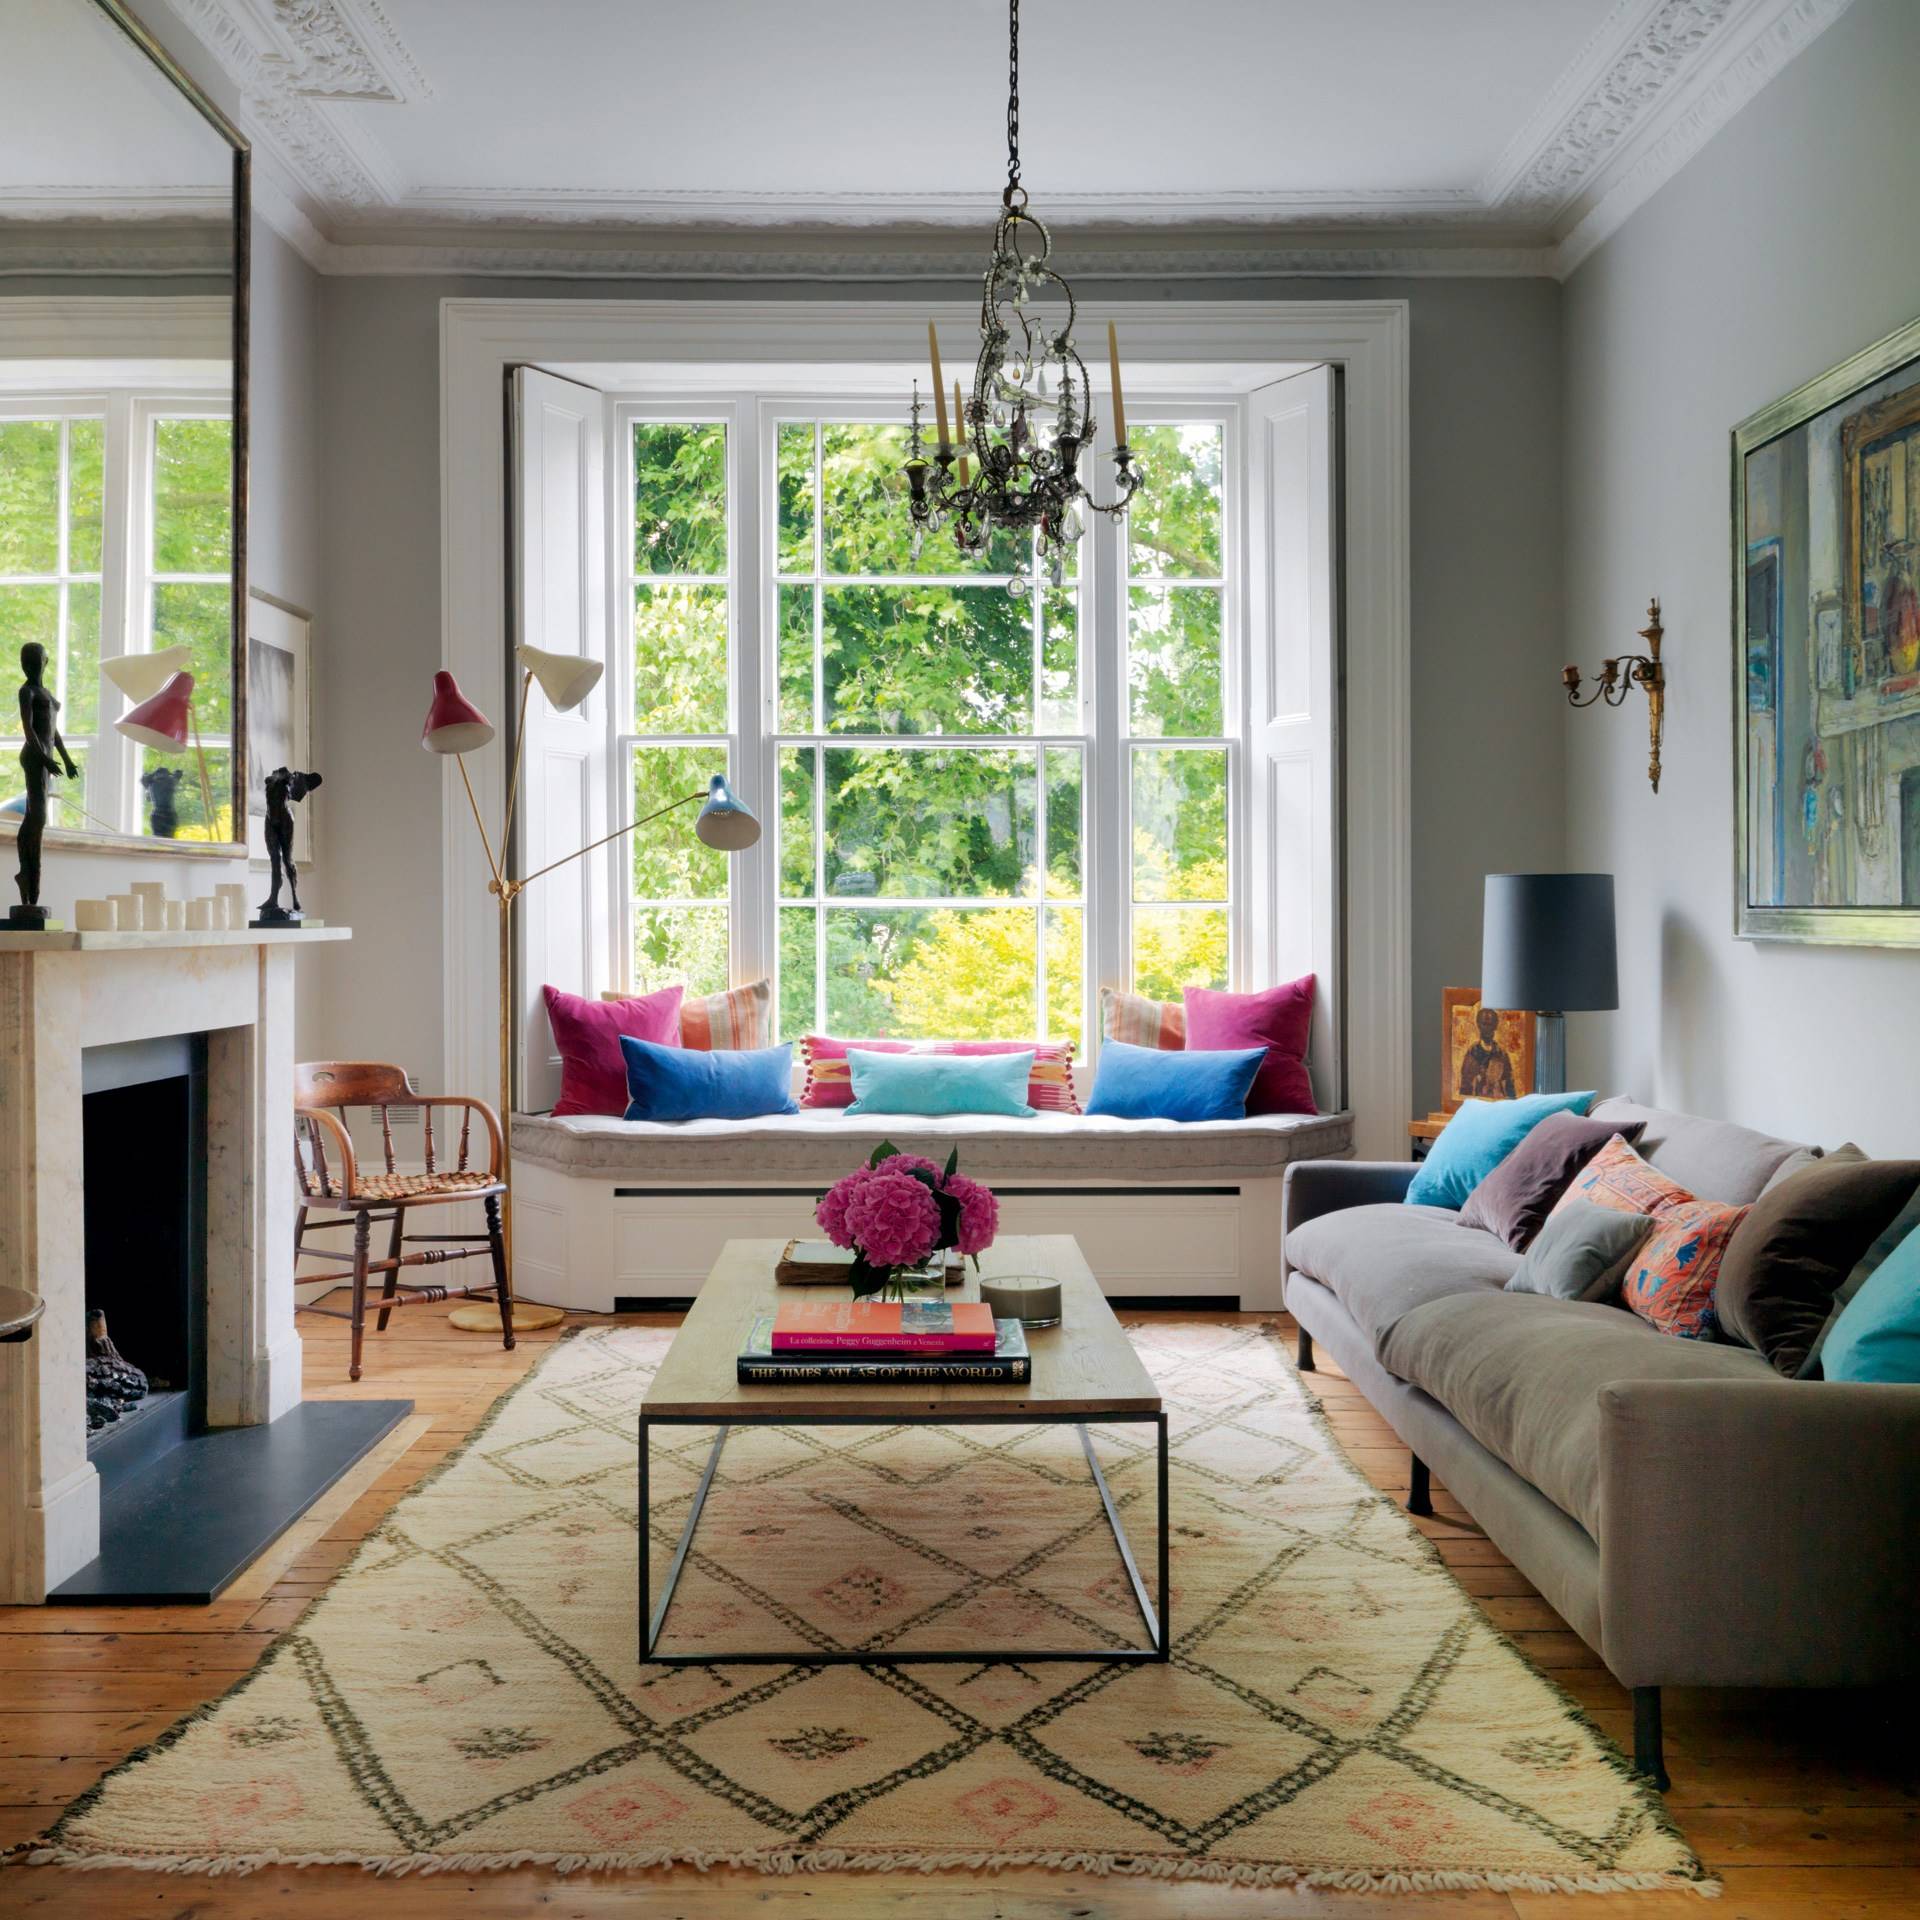 Modern Victorian Decorating Ideas: Combining Contemporary And Classic Styles